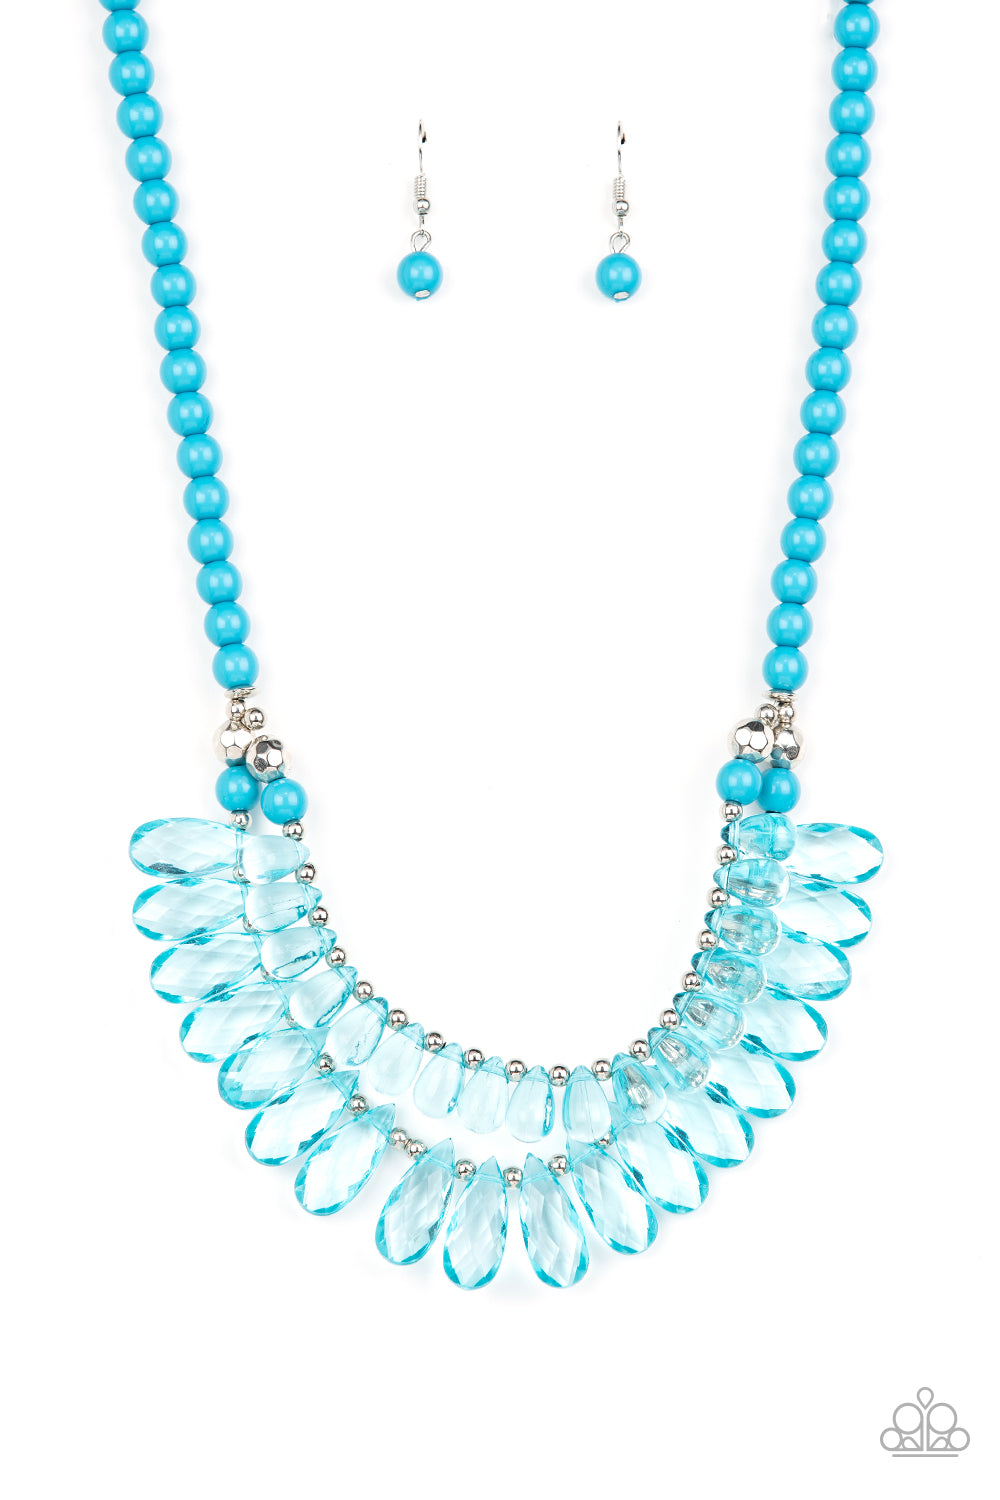 All Across the GLOBETROTTER Blue Necklace Paparazzi Accessories. Subscribe & Save! #P2ST-BLXX-170XX